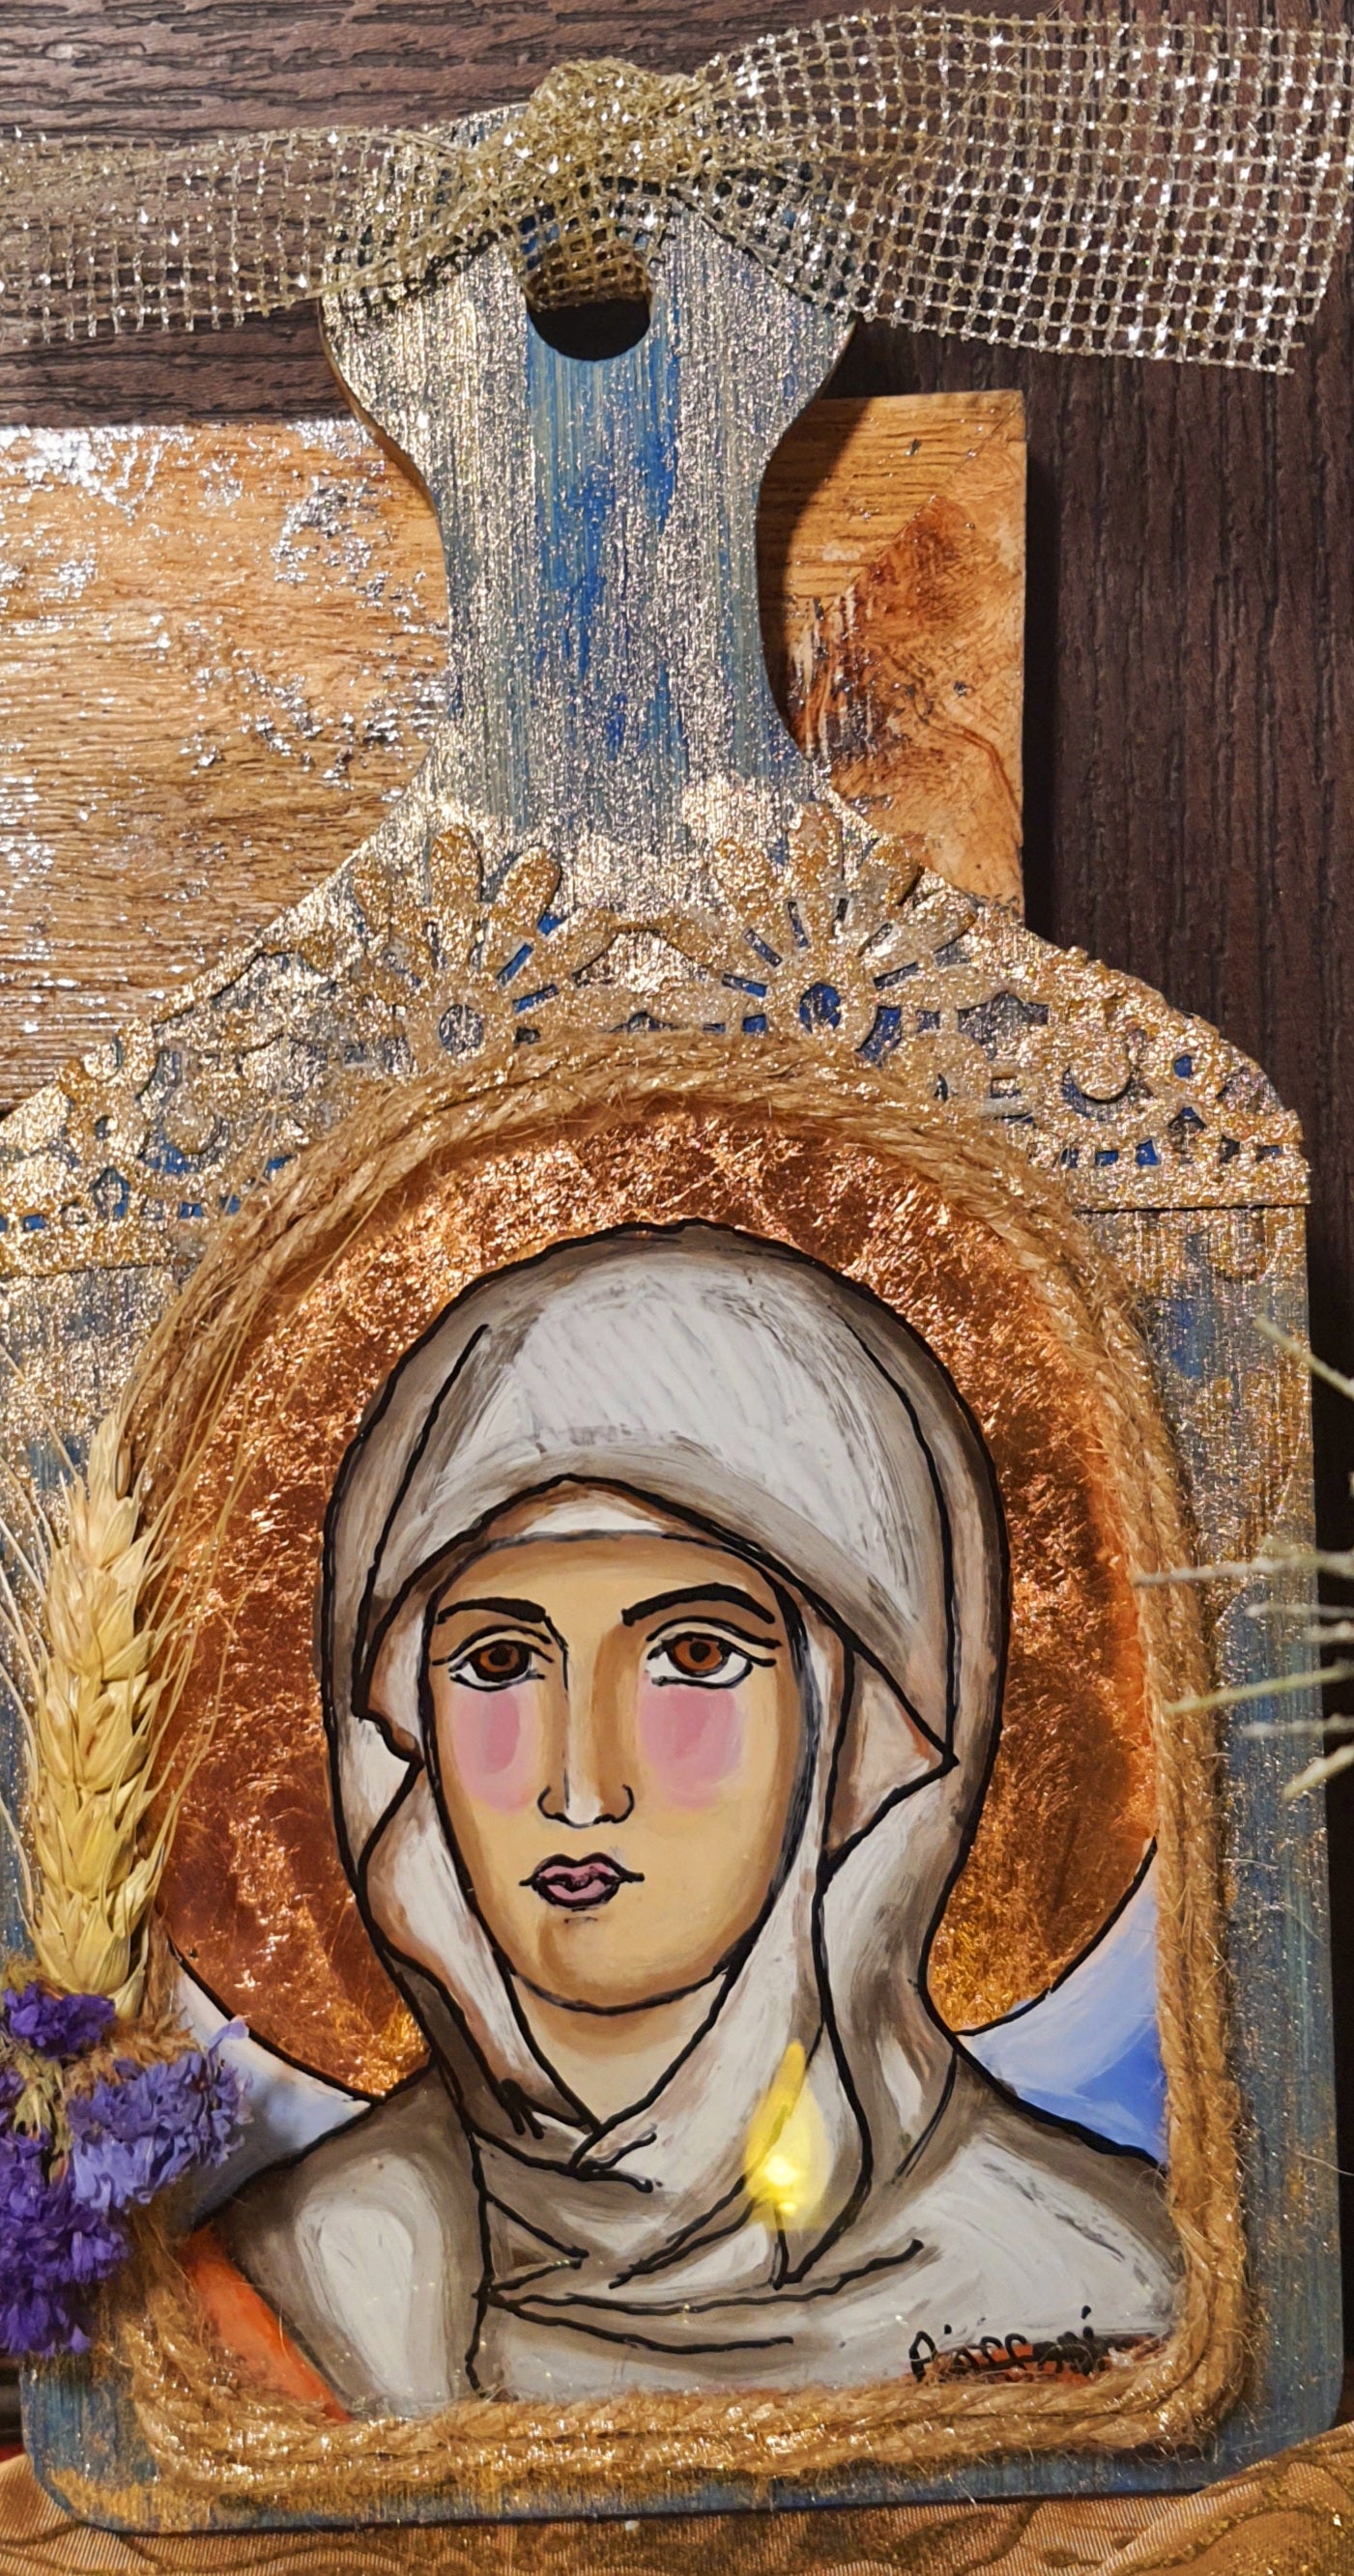 The Haloed Icon: The Woman with the White Naframa